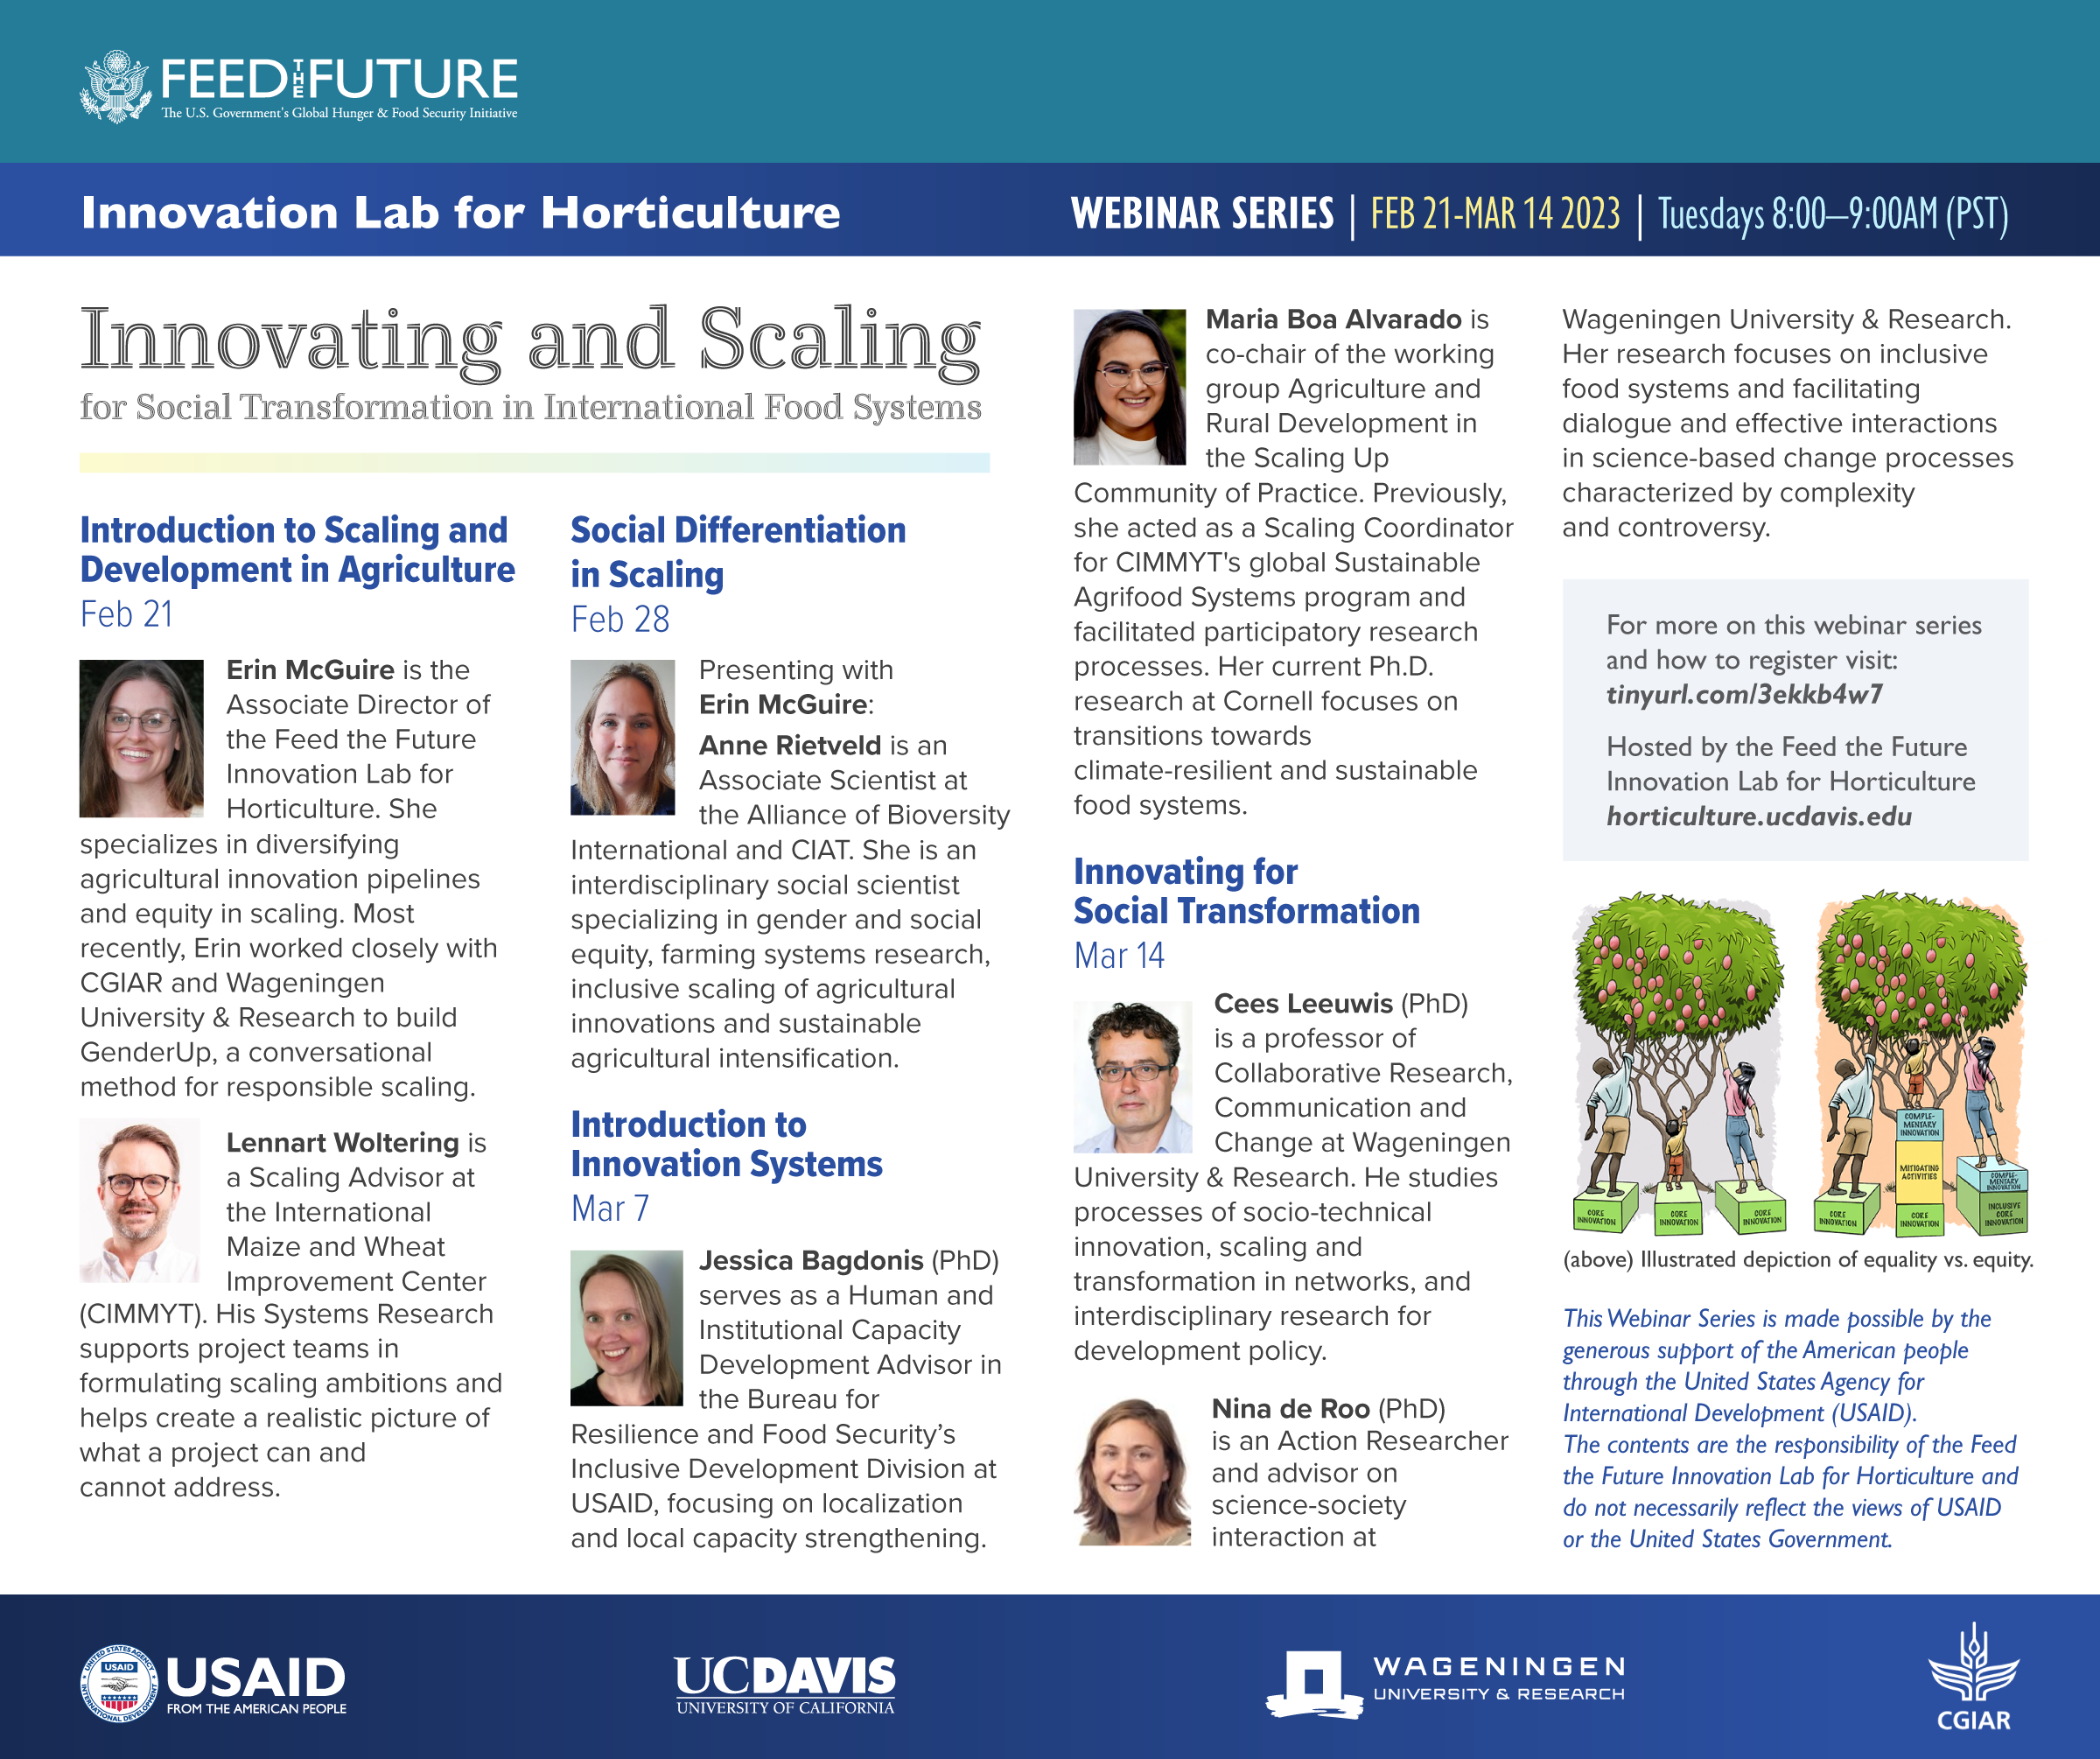 Feed the Future Innovation Lab for Horticulture Webinar Series flier for "Innovating and Scaling for Social Transformations in International Food Systems."